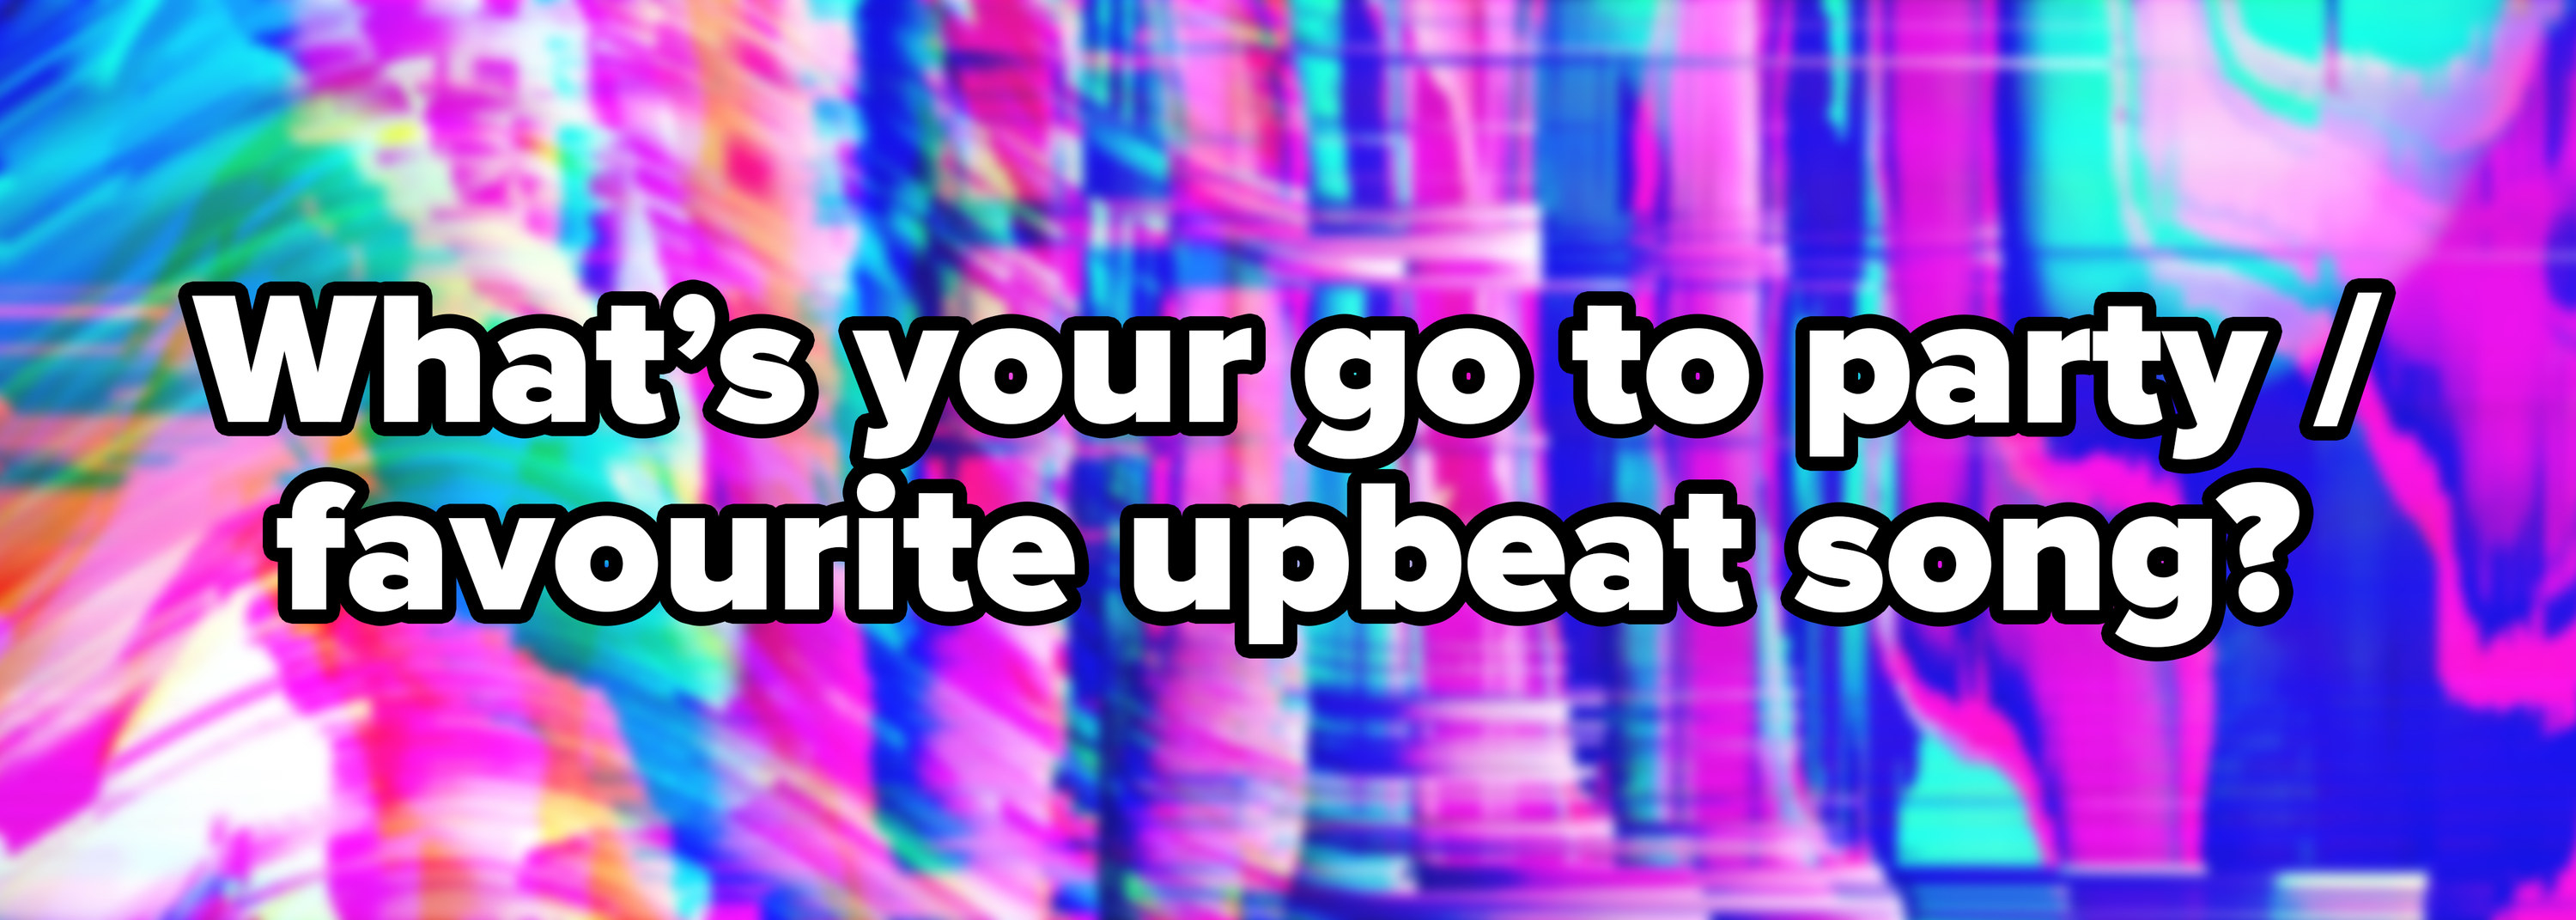 Abstract pink blue mint neon psychedelic background with the question &quot;What’s your go-to party favourite upbeat song?&quot; written on top